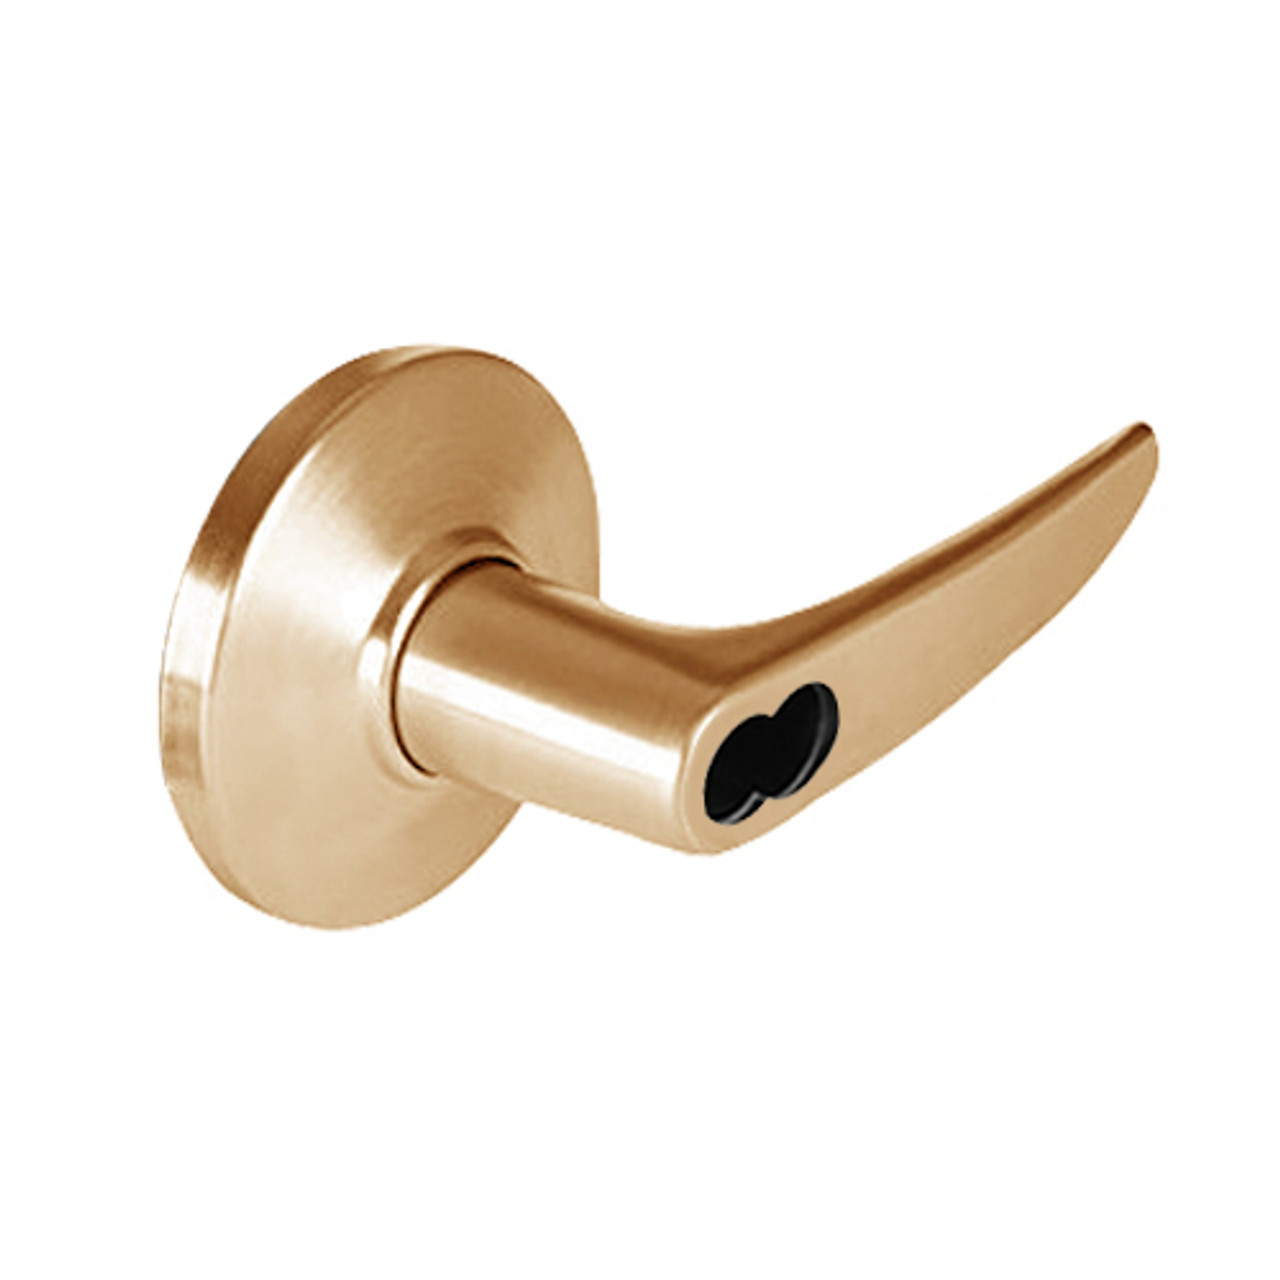 9K37XD16DSTK612 Best 9K Series Special Function Cylindrical Lever Locks with Curved without Return Lever Design Accept 7 Pin Best Core in Satin Bronze